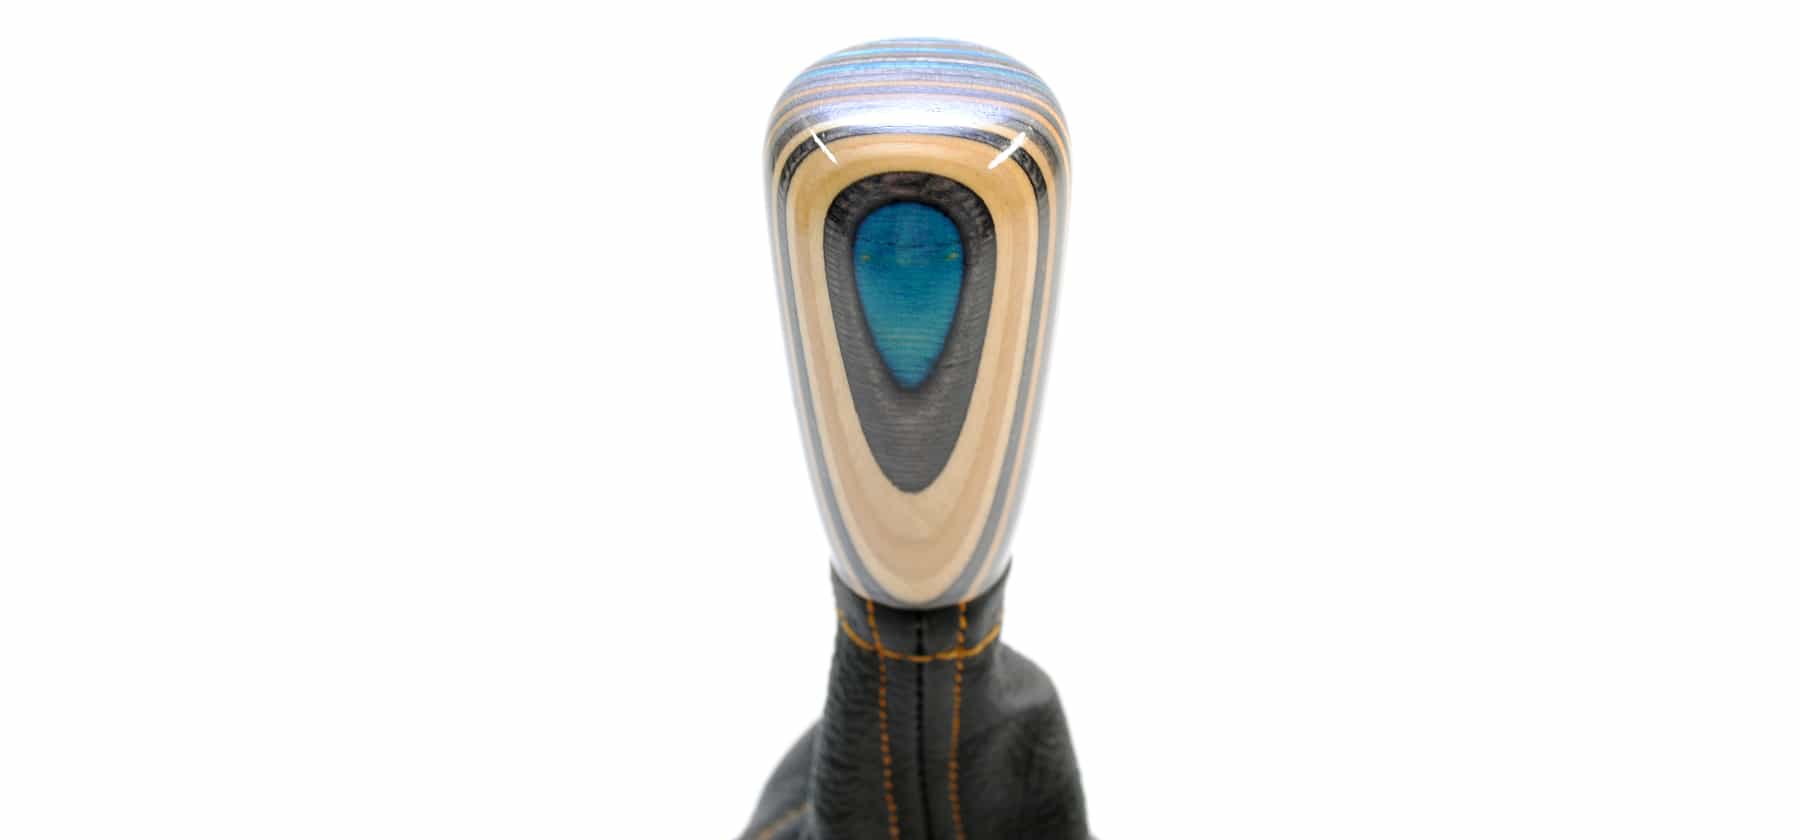 teardrop blue shift knobs with vertical layers